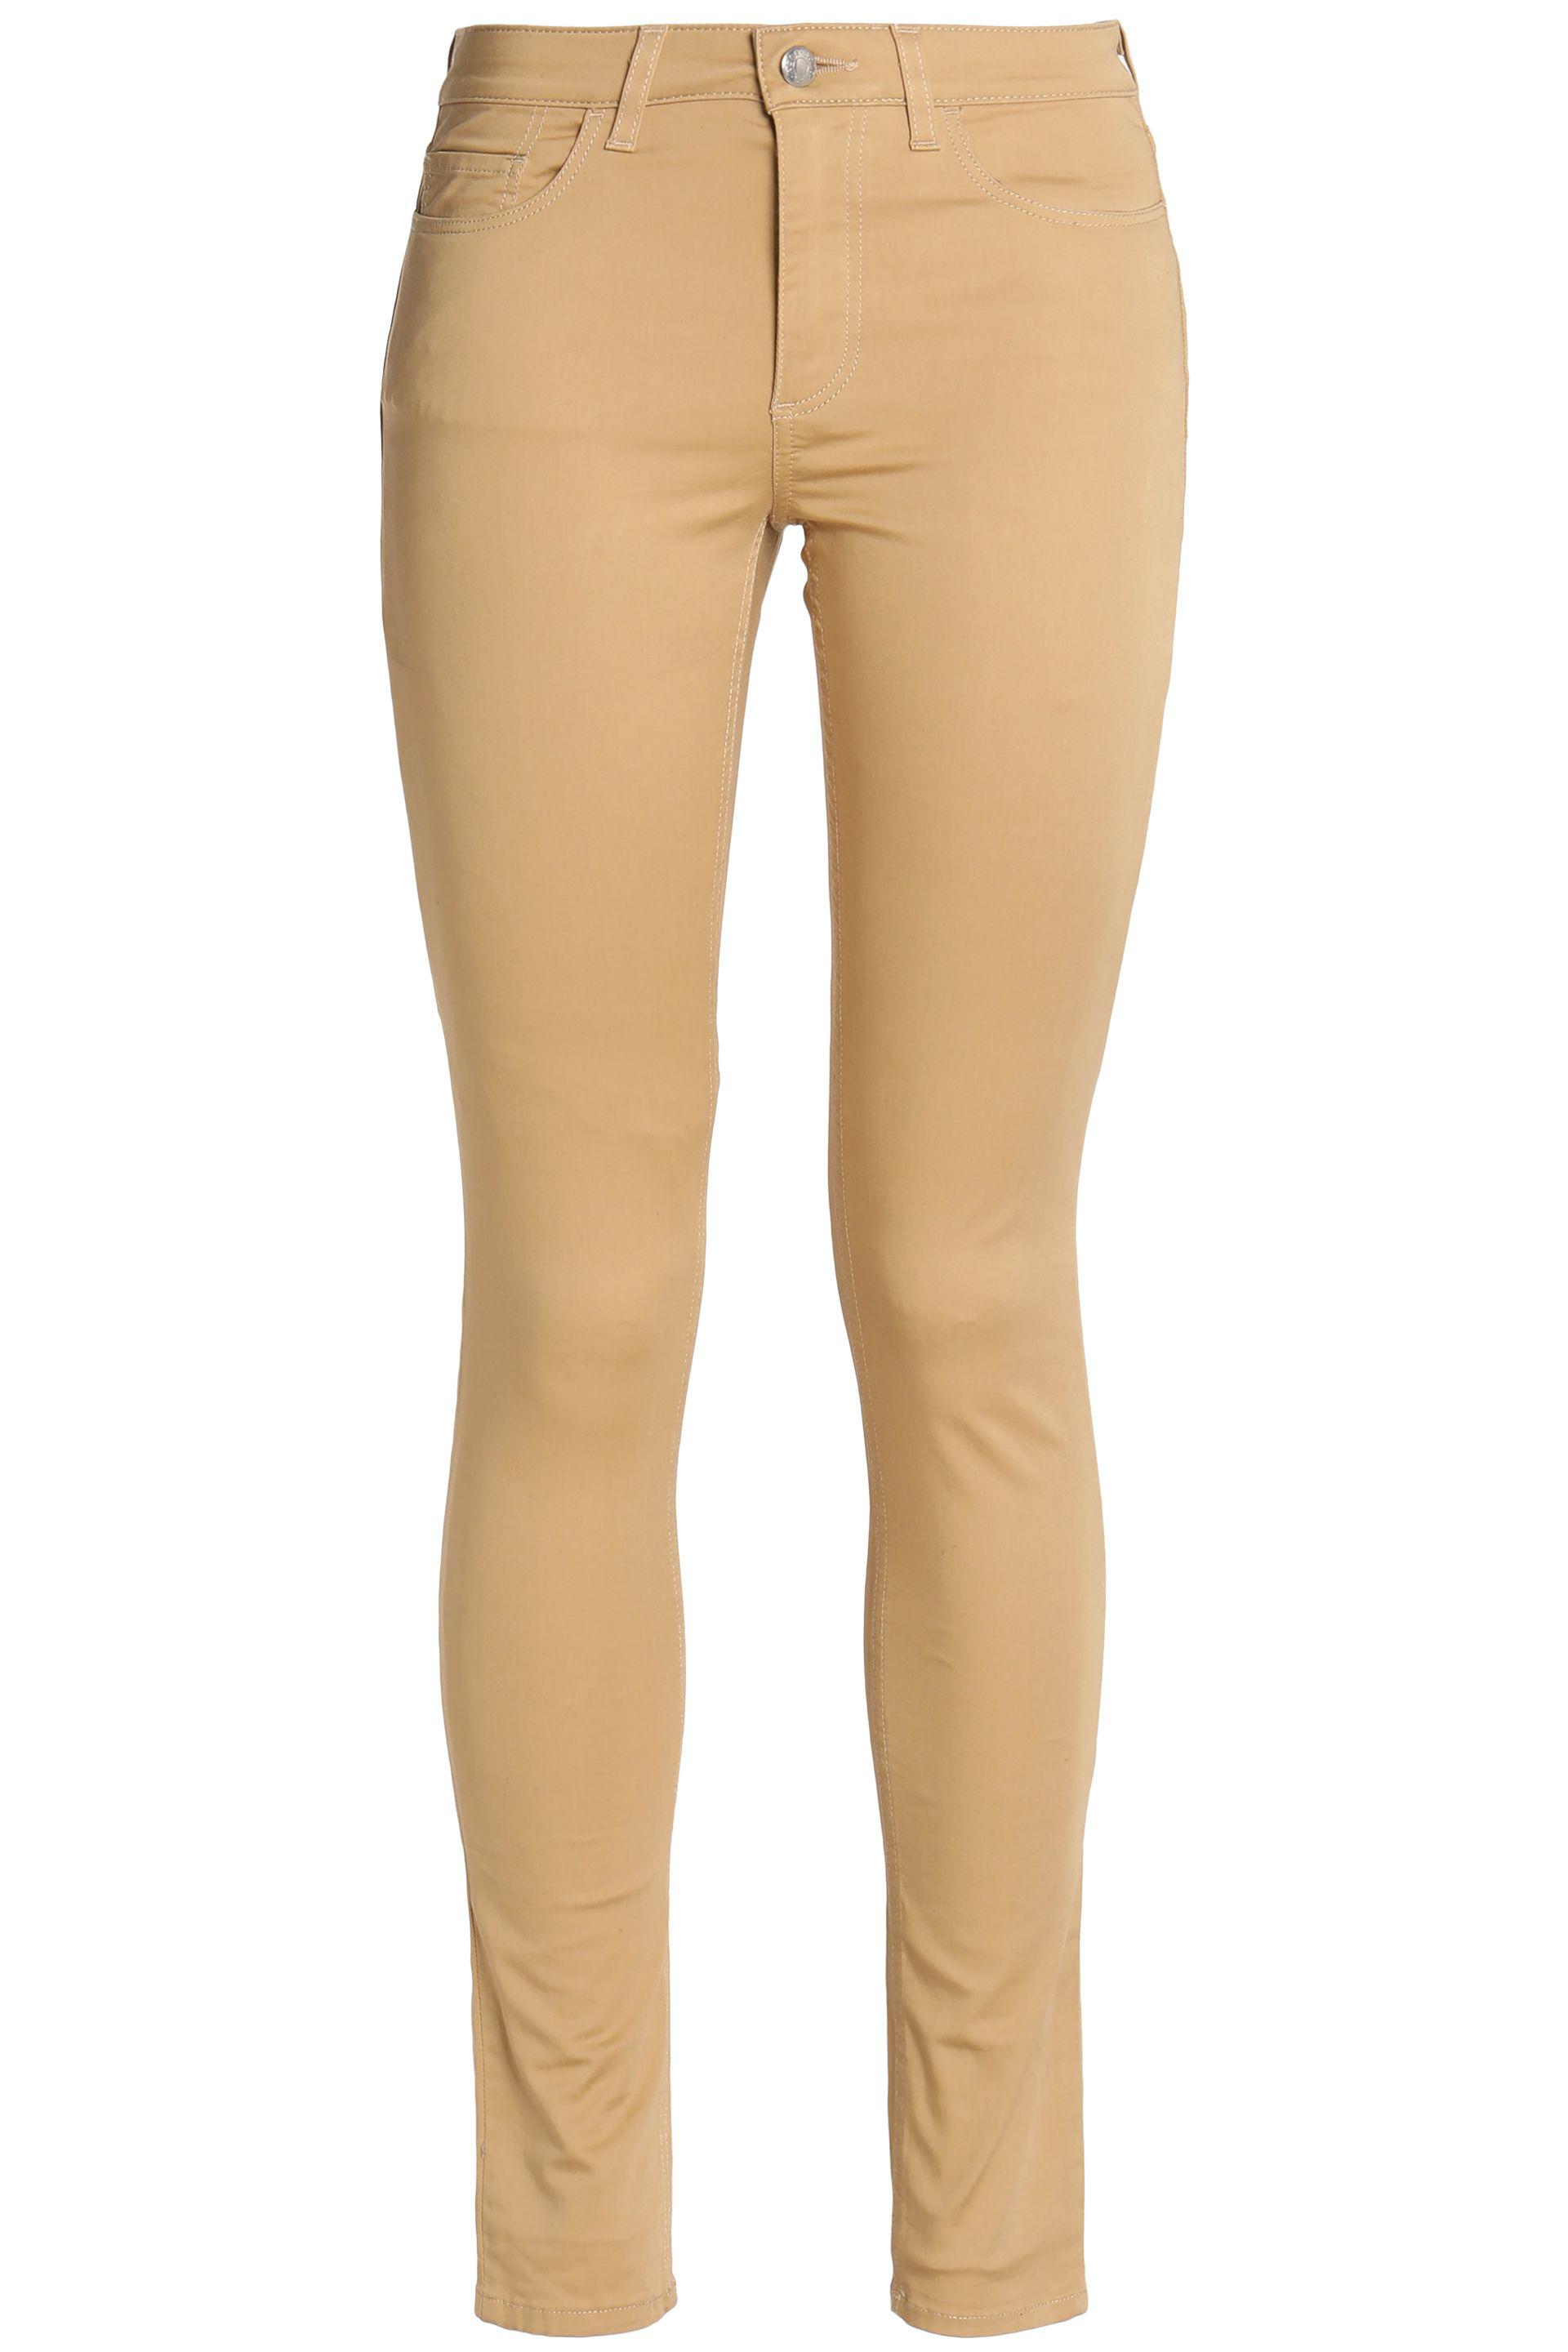 Lyst - Acne Stretch-cotton Skinny-leg Pants in Natural